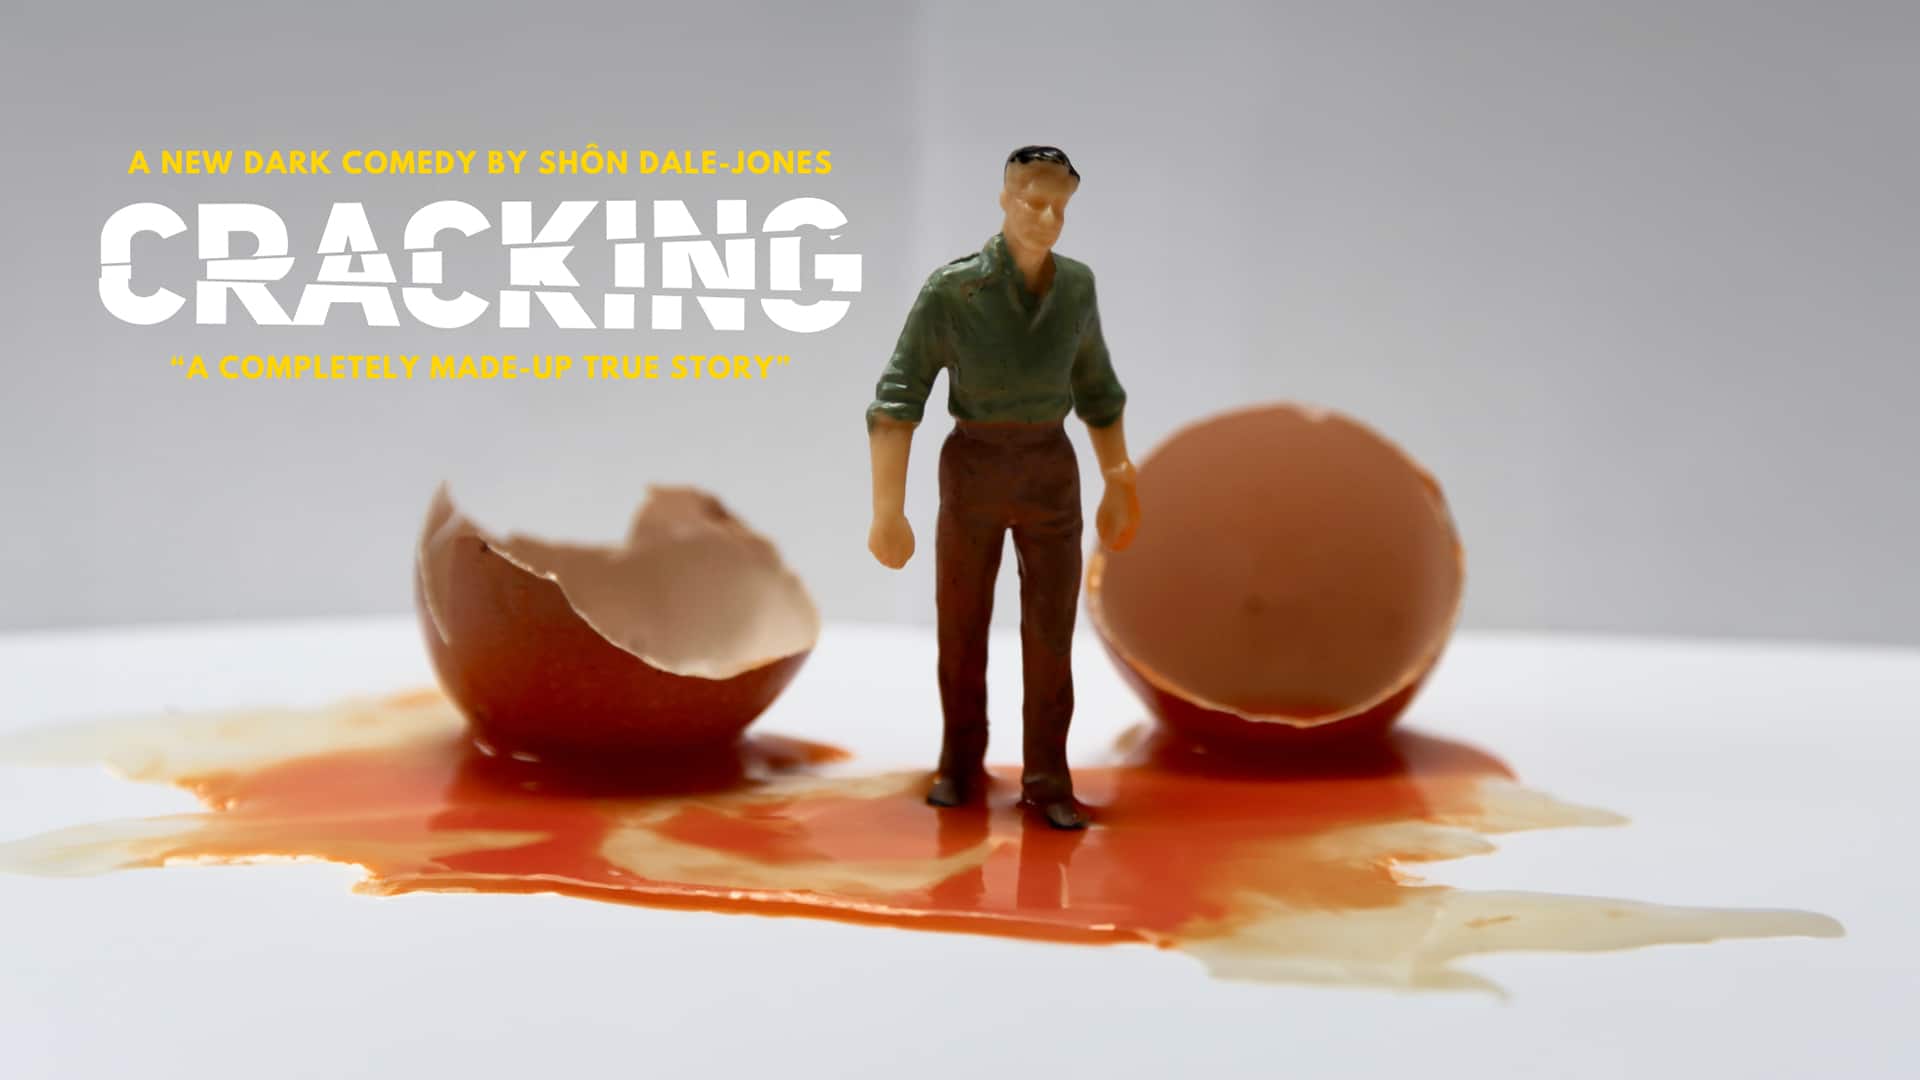 Cracking artwork. A small figurine of a man wearing a green shirt and brown trousers steps through the spilled yolk of a cracked egg on a white table, with split egg shells either side. Text reads: 'A new dark comedy by Shôn Dale-Jones. CRACKING. A completely made-up true story'.